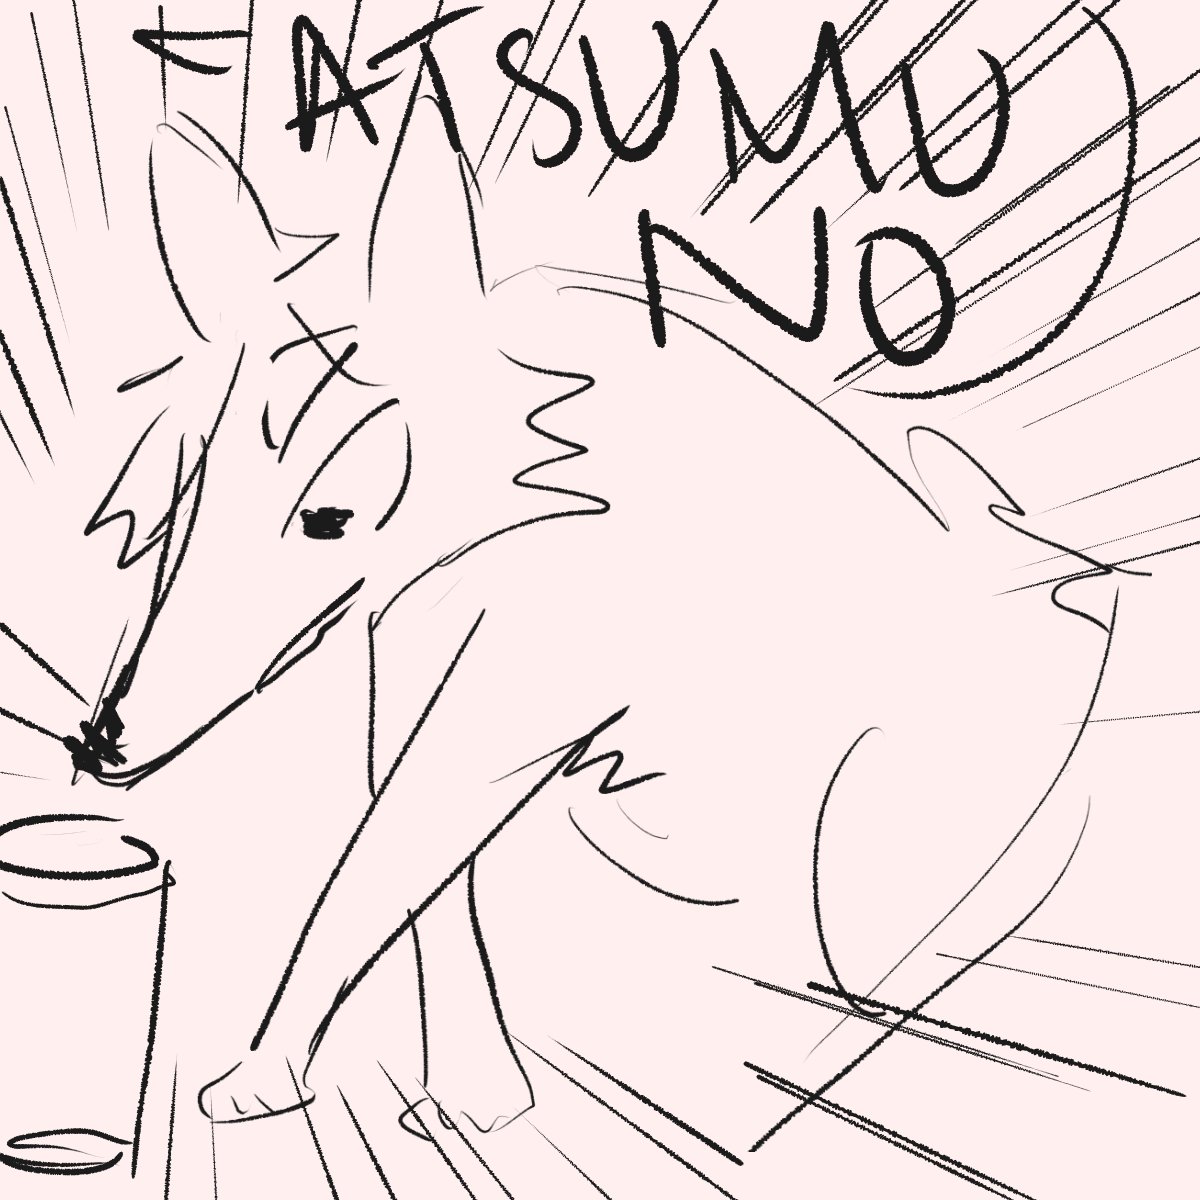 tsumufox gets his head stuck in a plastic coffee cup (to get attention)